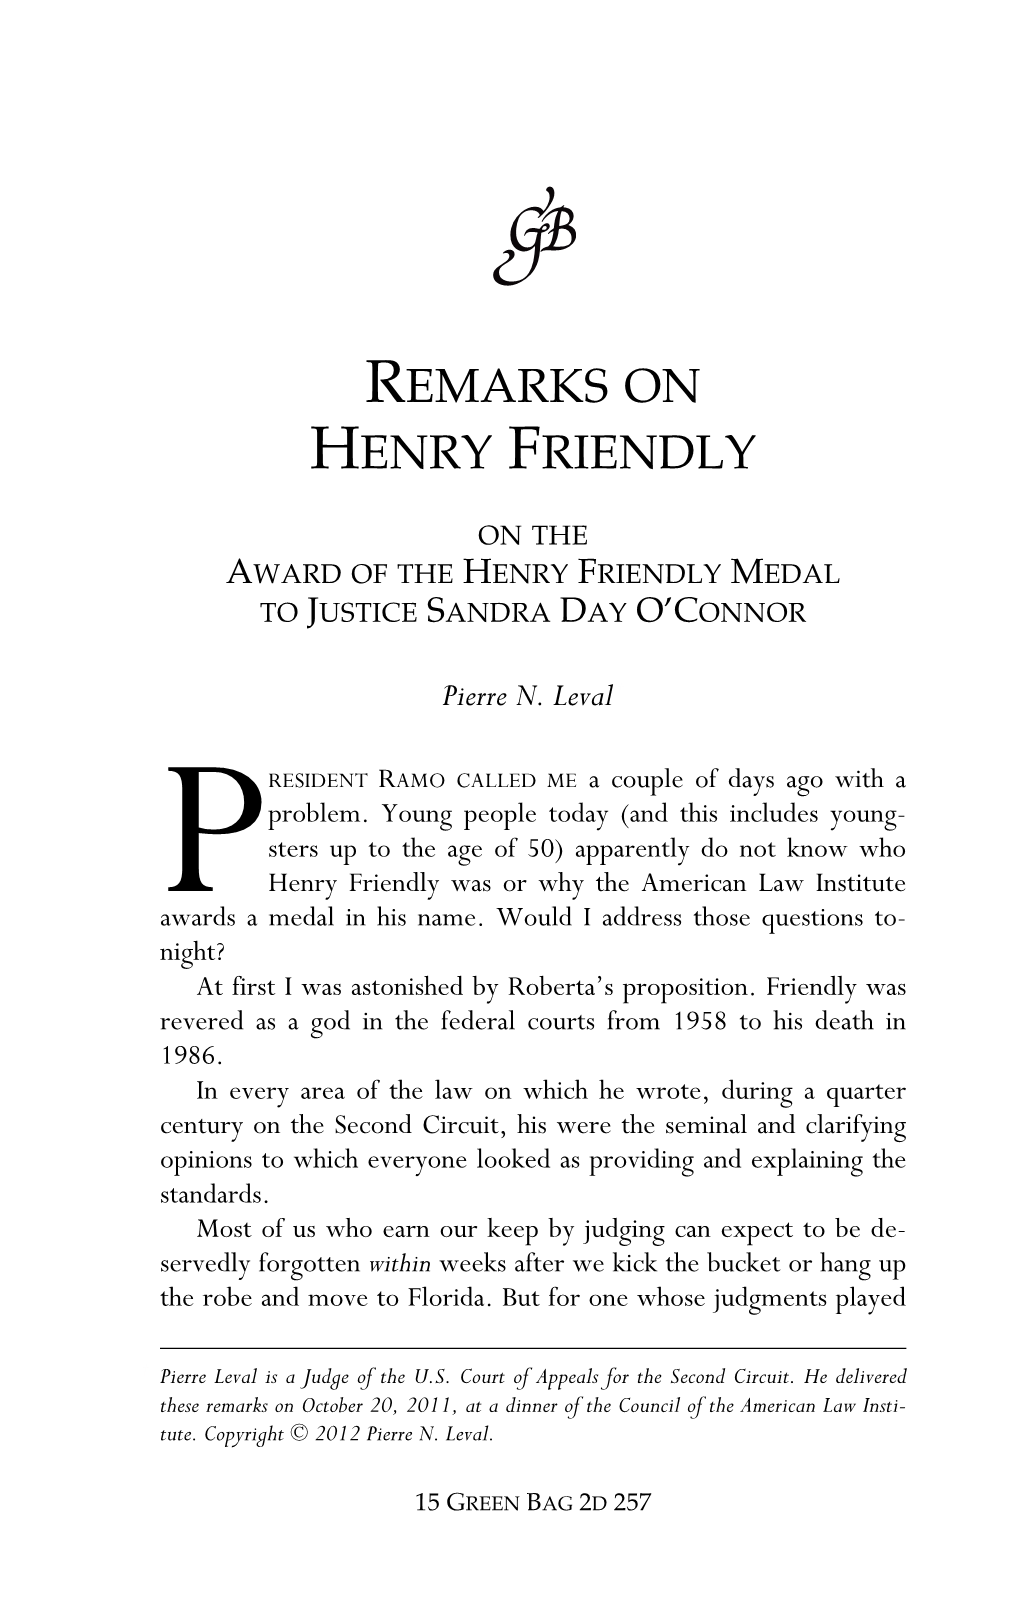 Remarks on Henry Friendly